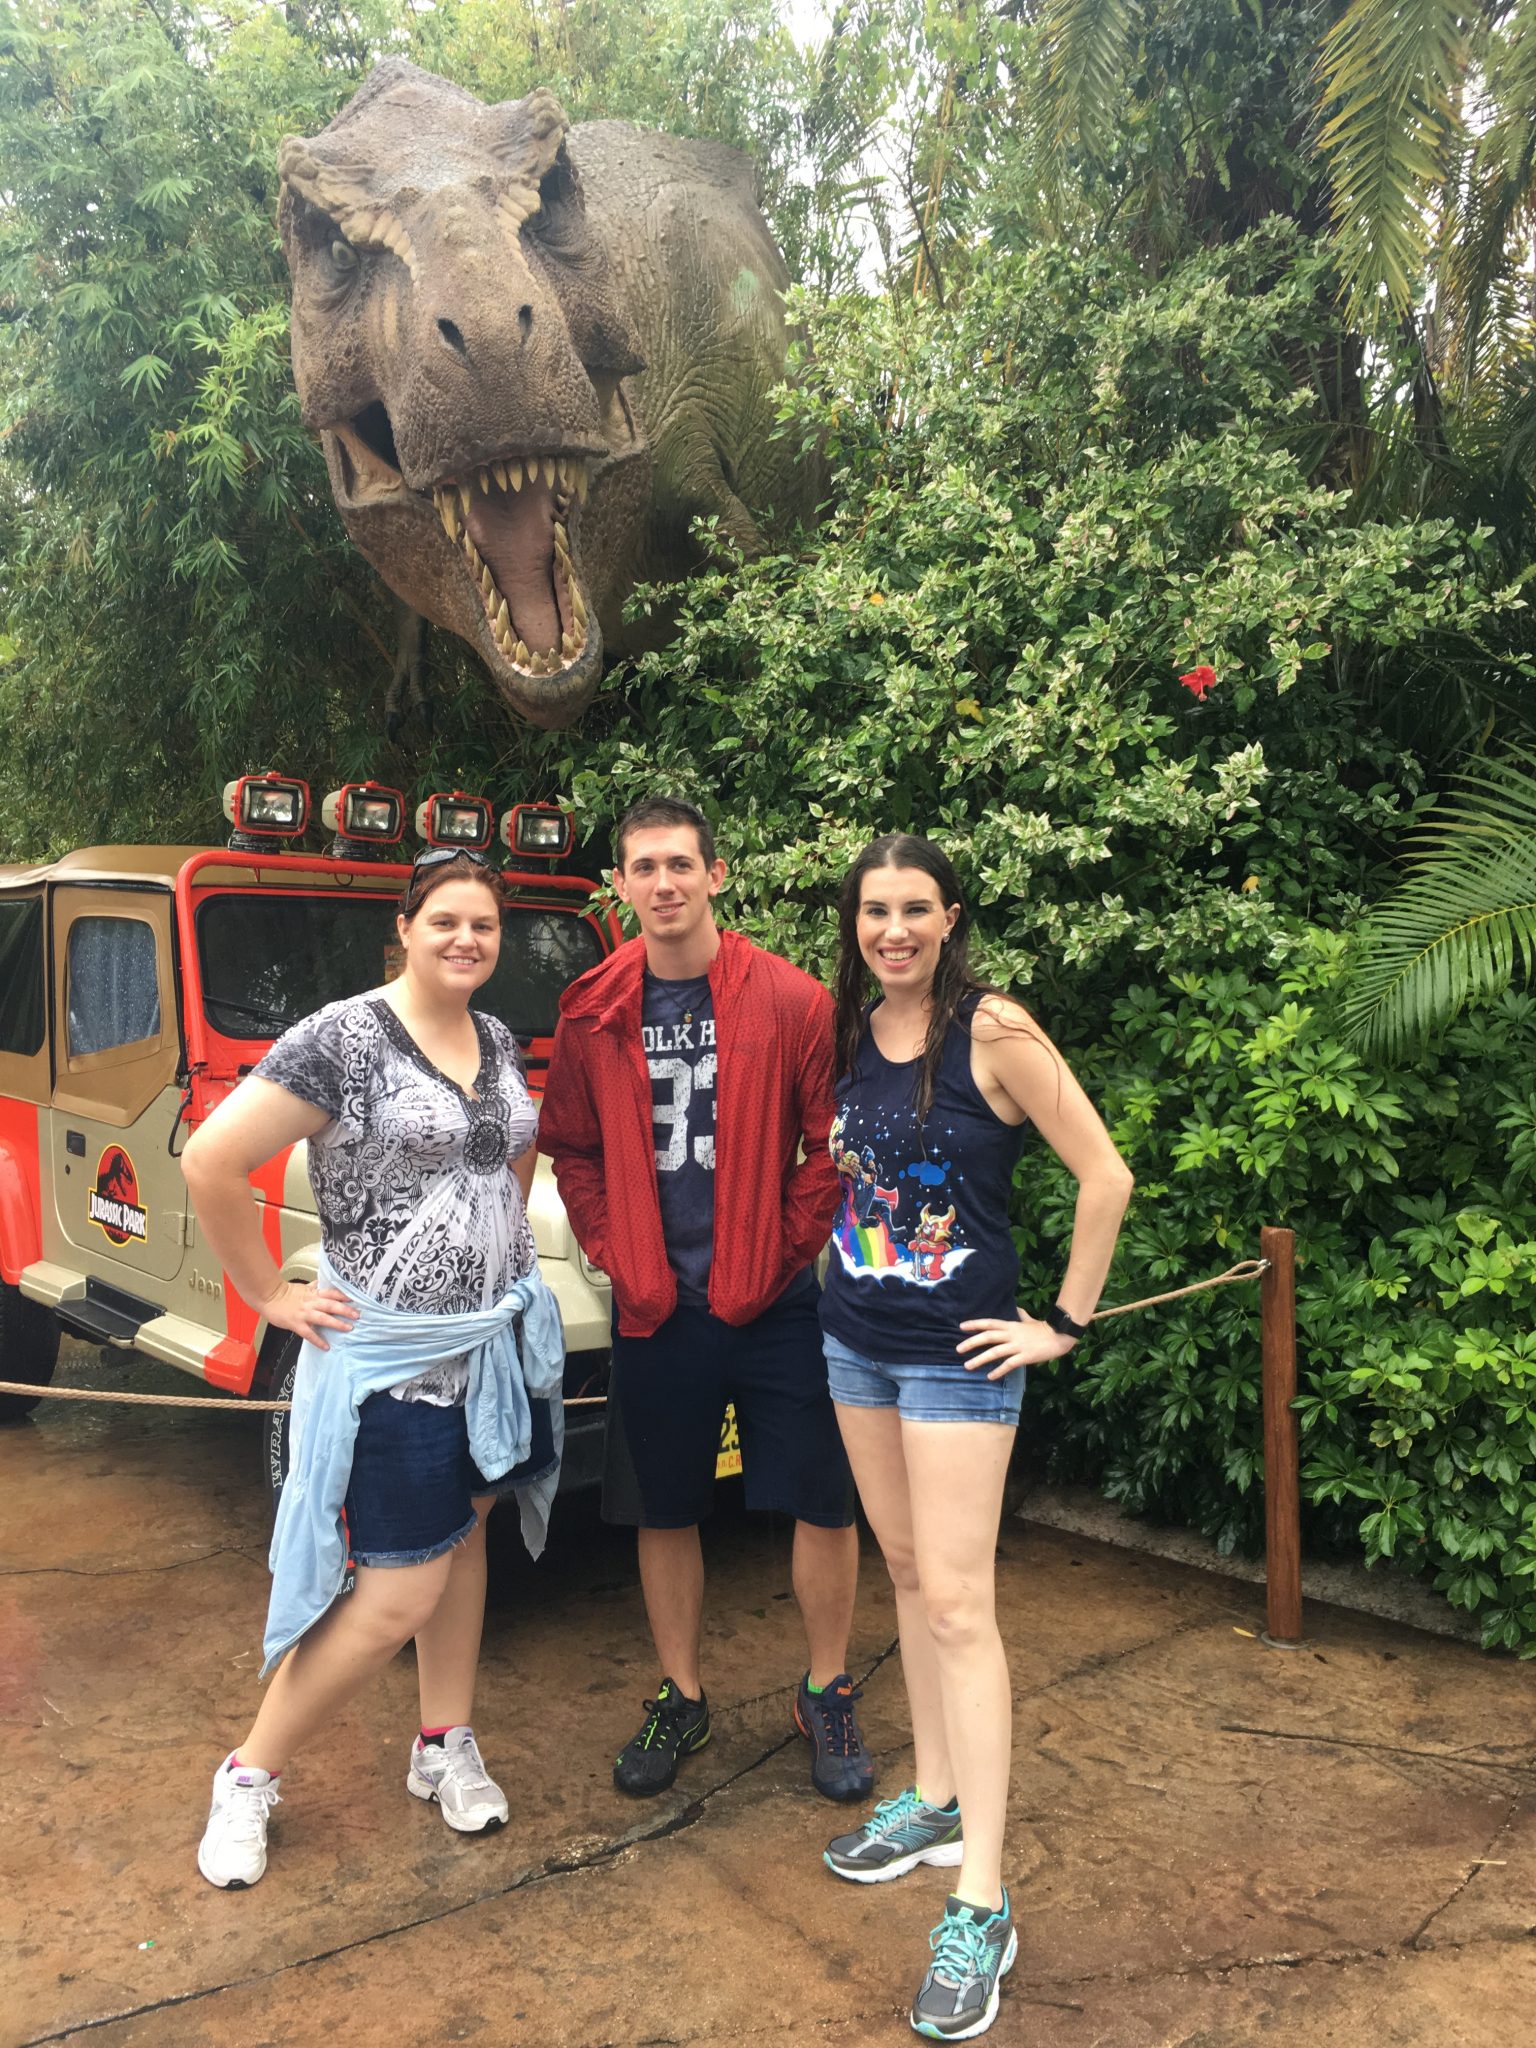 Lacey, Robby, and Chelsea in Jurassic Park in the rain.